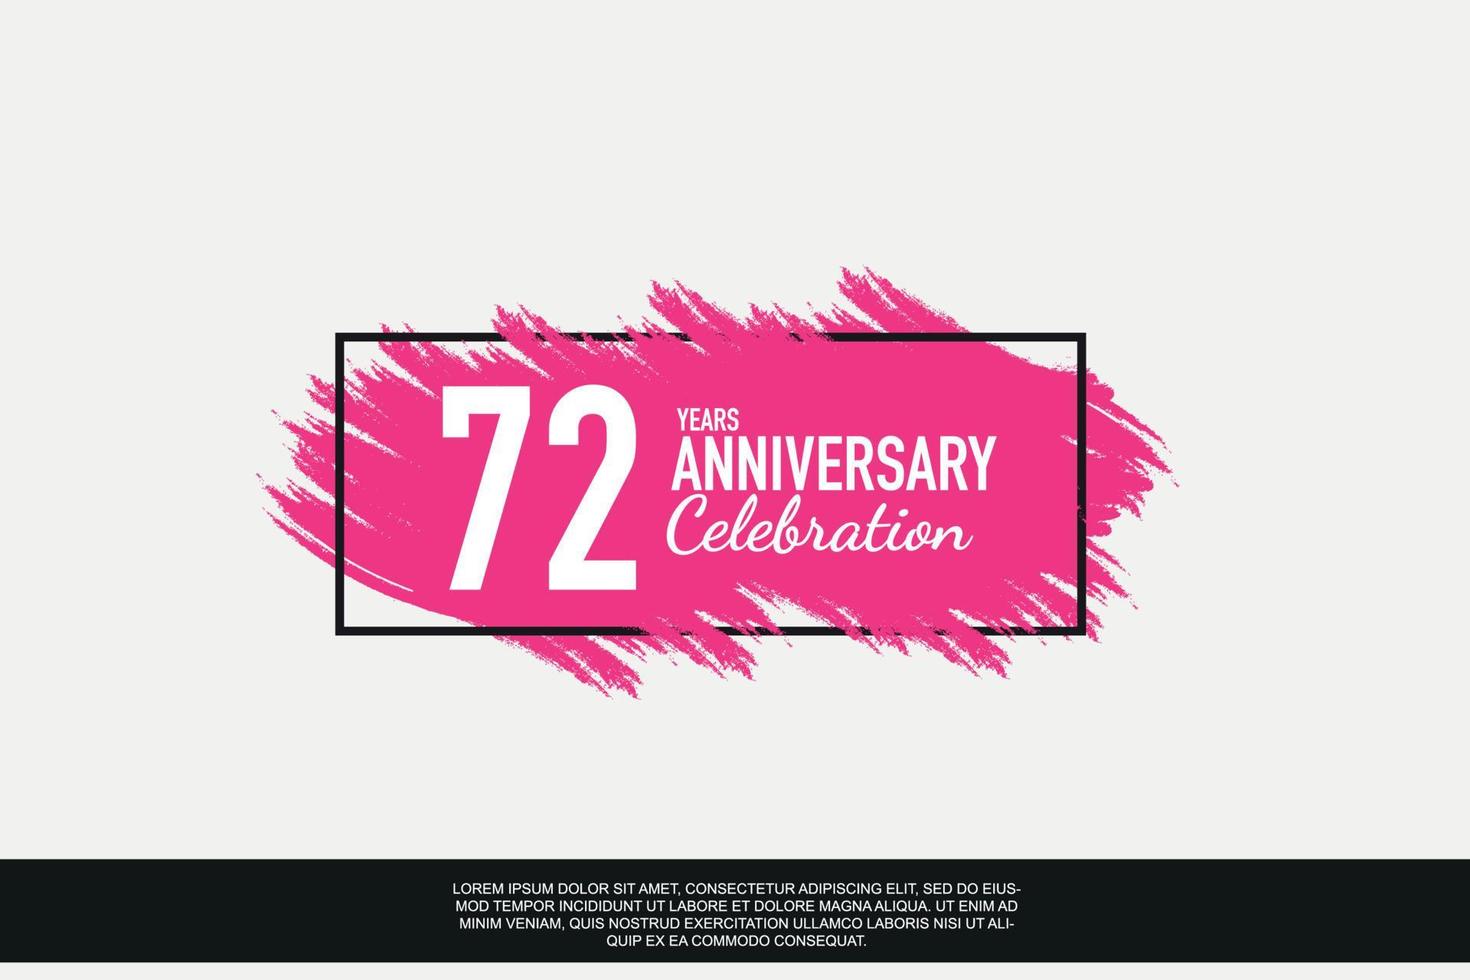 72 year anniversary celebration vector pink design in black frame on white background abstract illustration logo